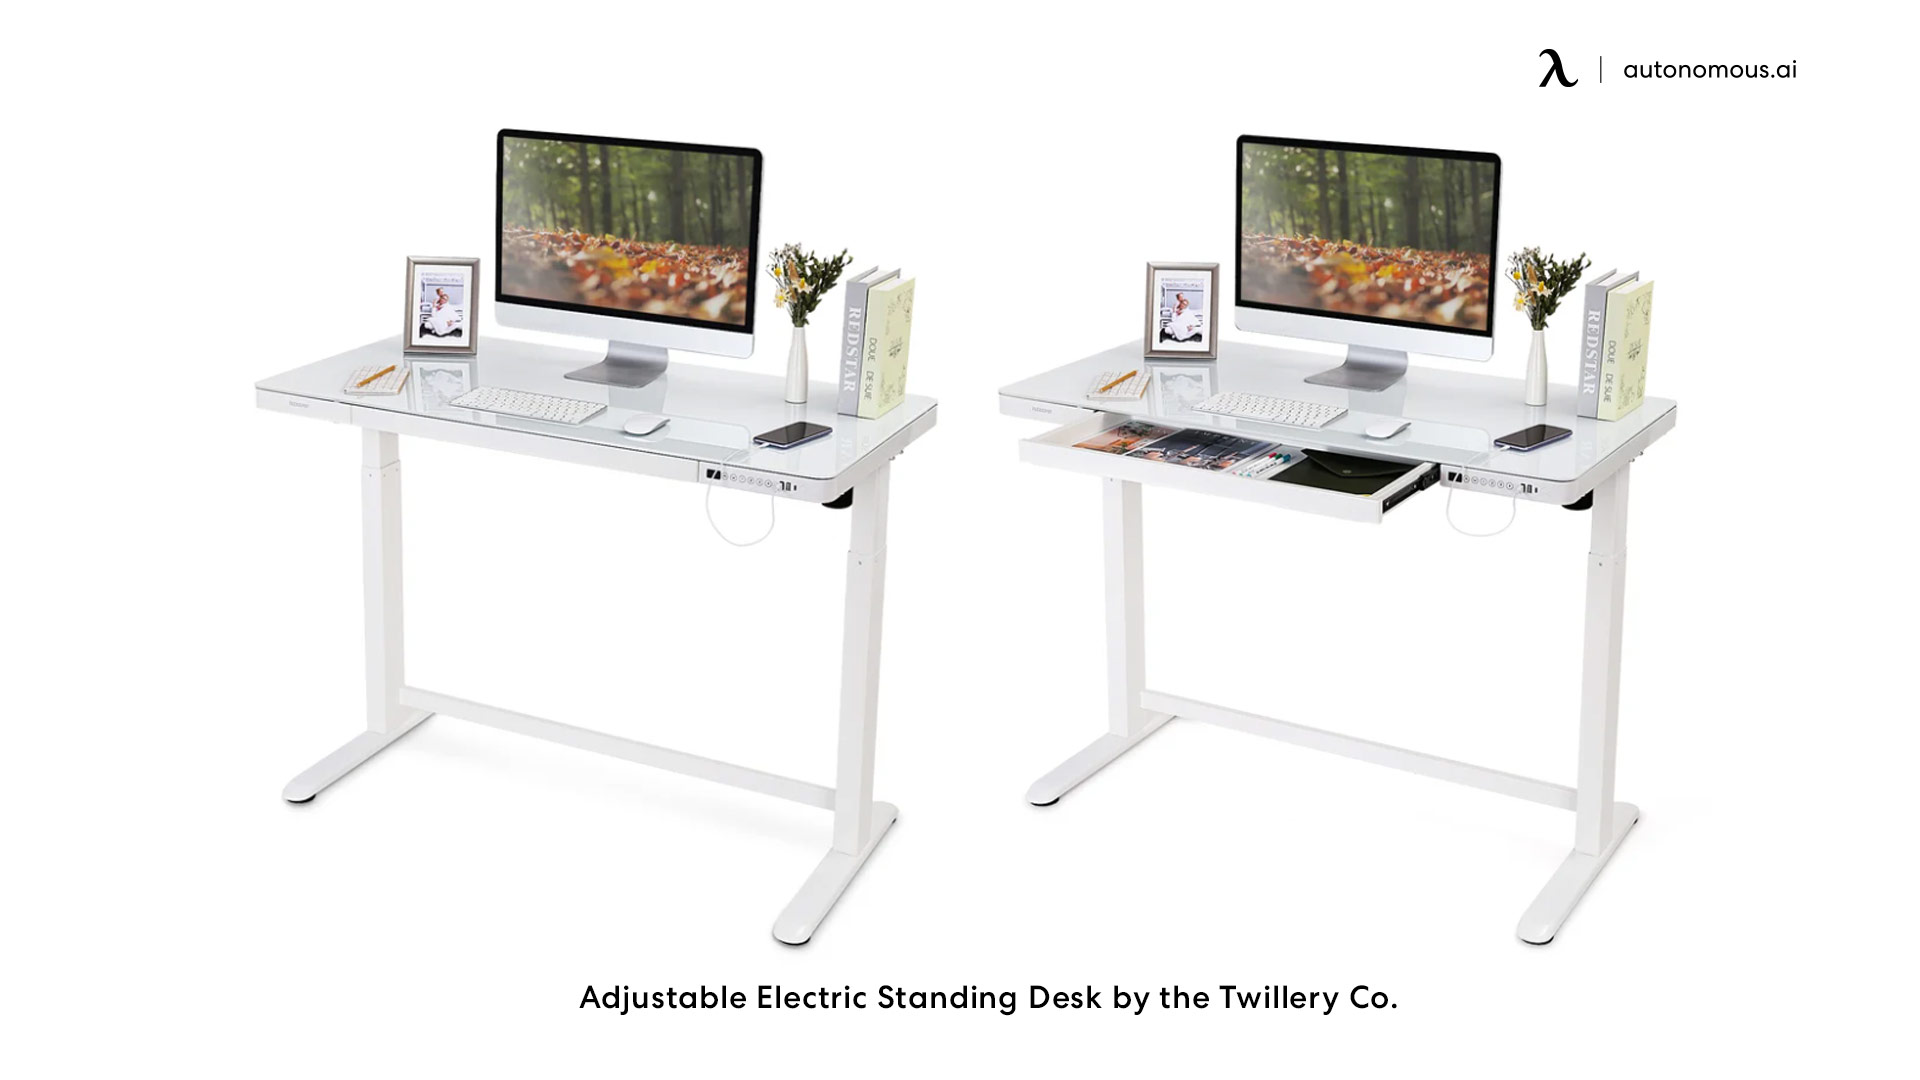 Twillery Co standing desk for two monitors